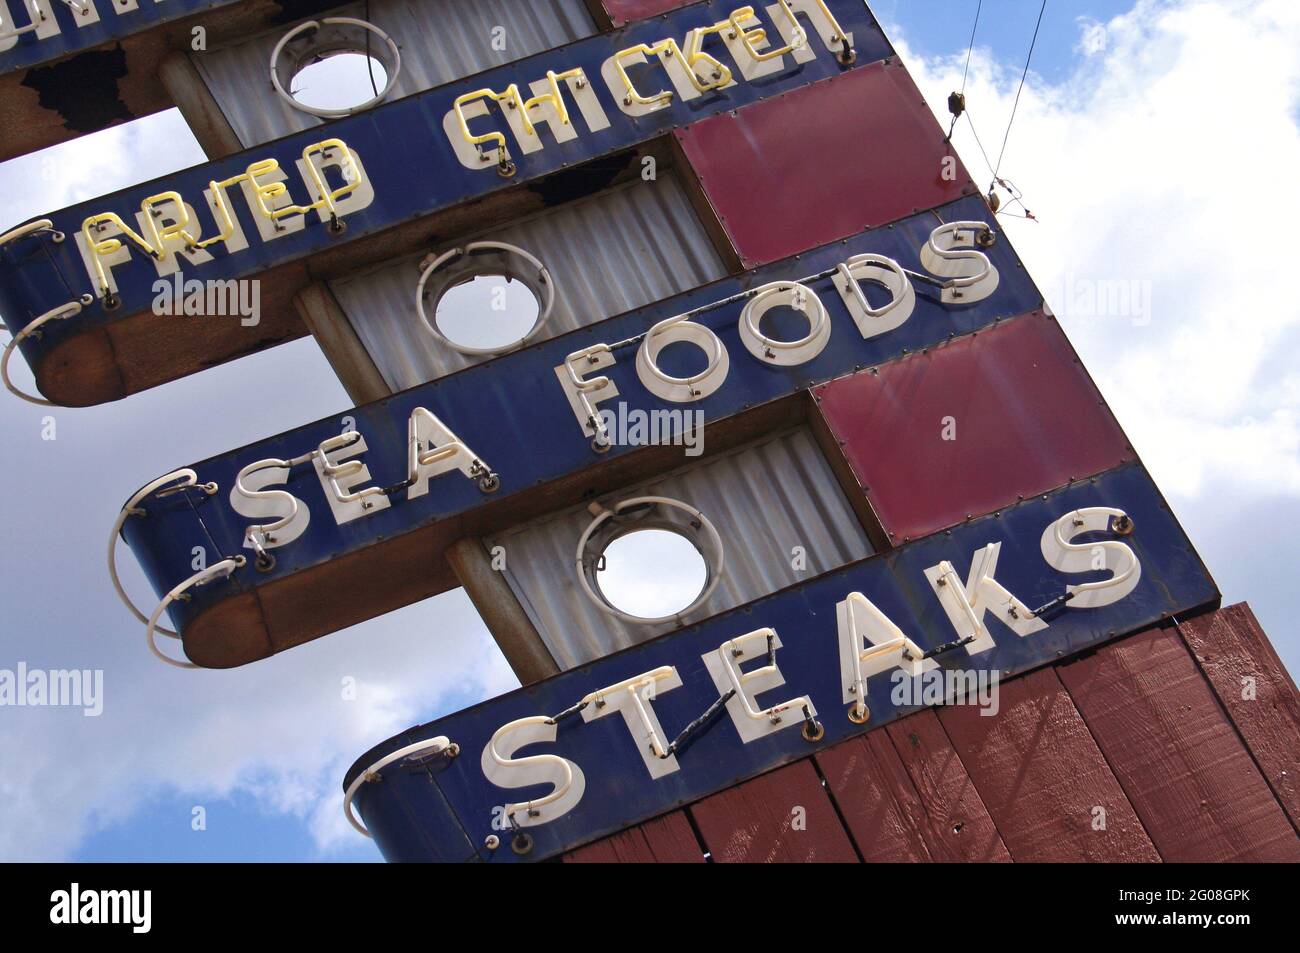 Restaurant Sign on Building Roof Stock Photo